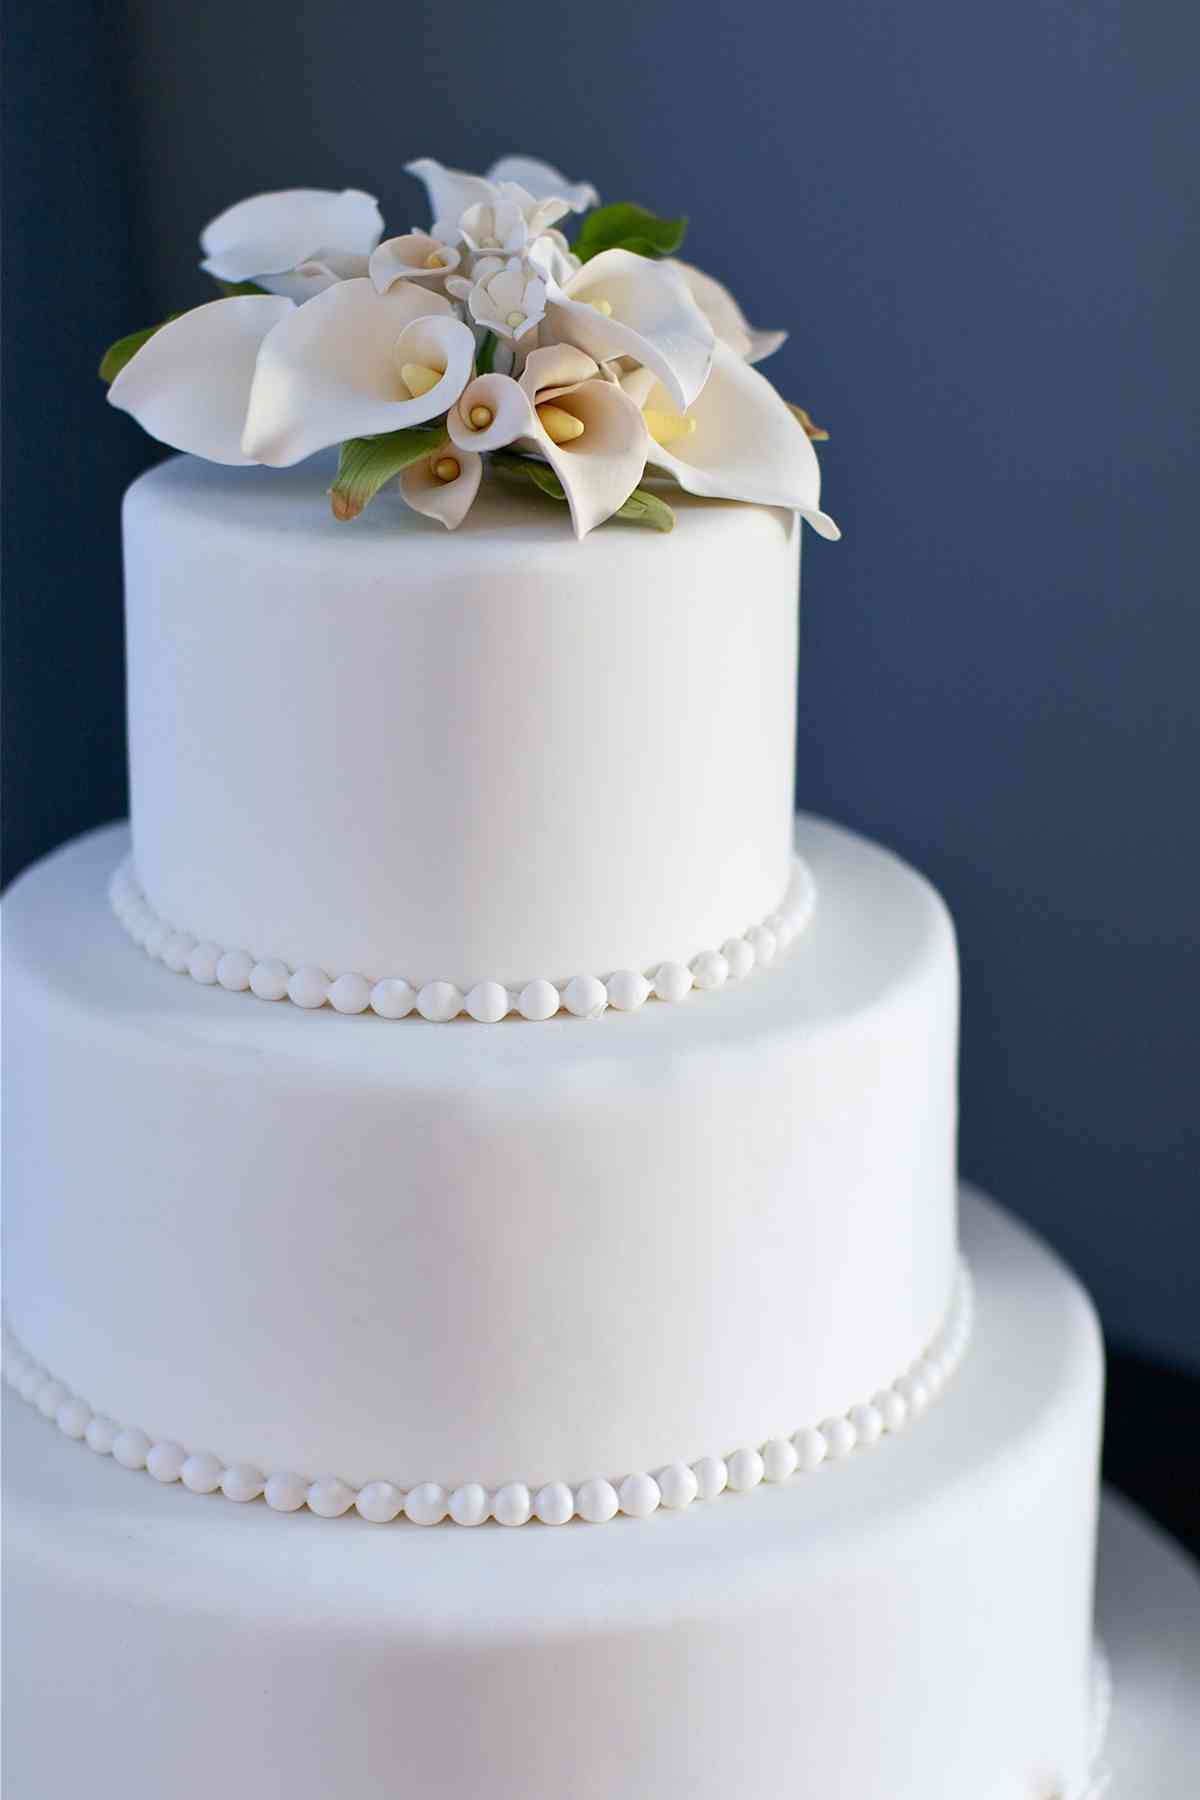 Wedding cakes can be a diverse as the couple | Pontotoc Progress |  djournal.com